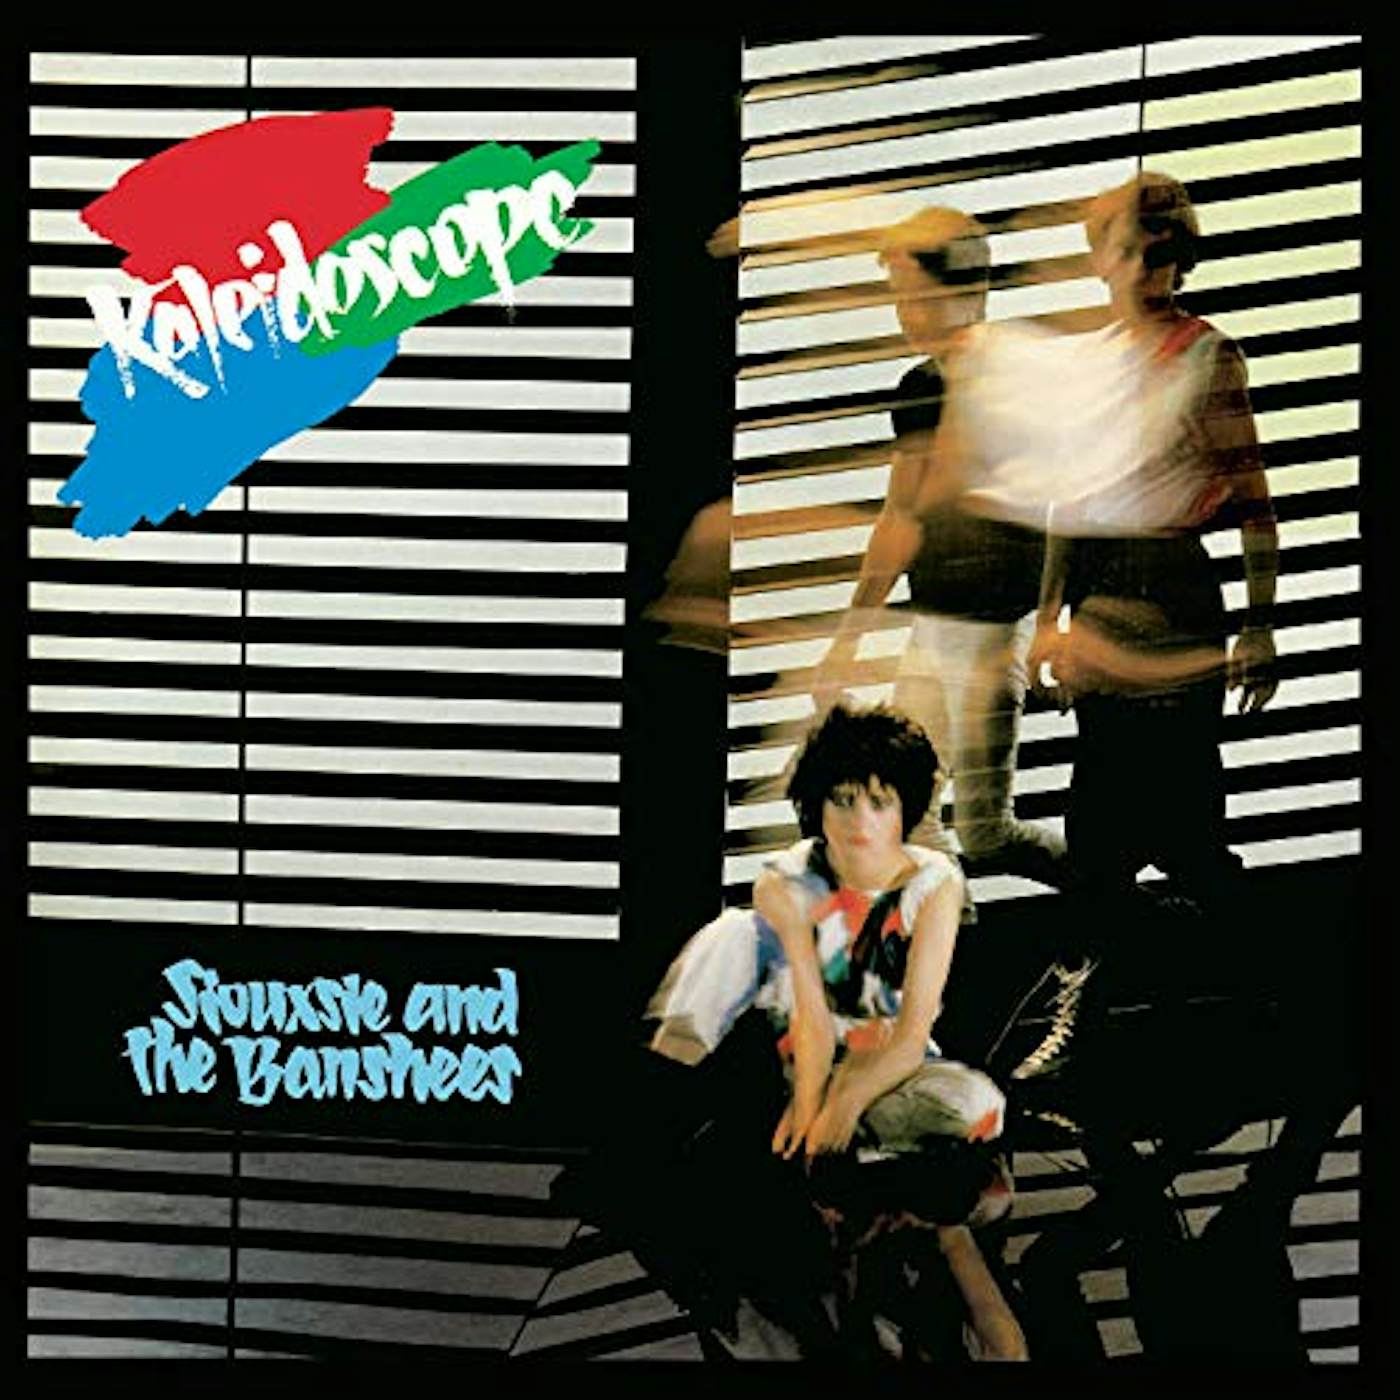 Siouxsie and the Banshees Kaleidoscope Vinyl Record